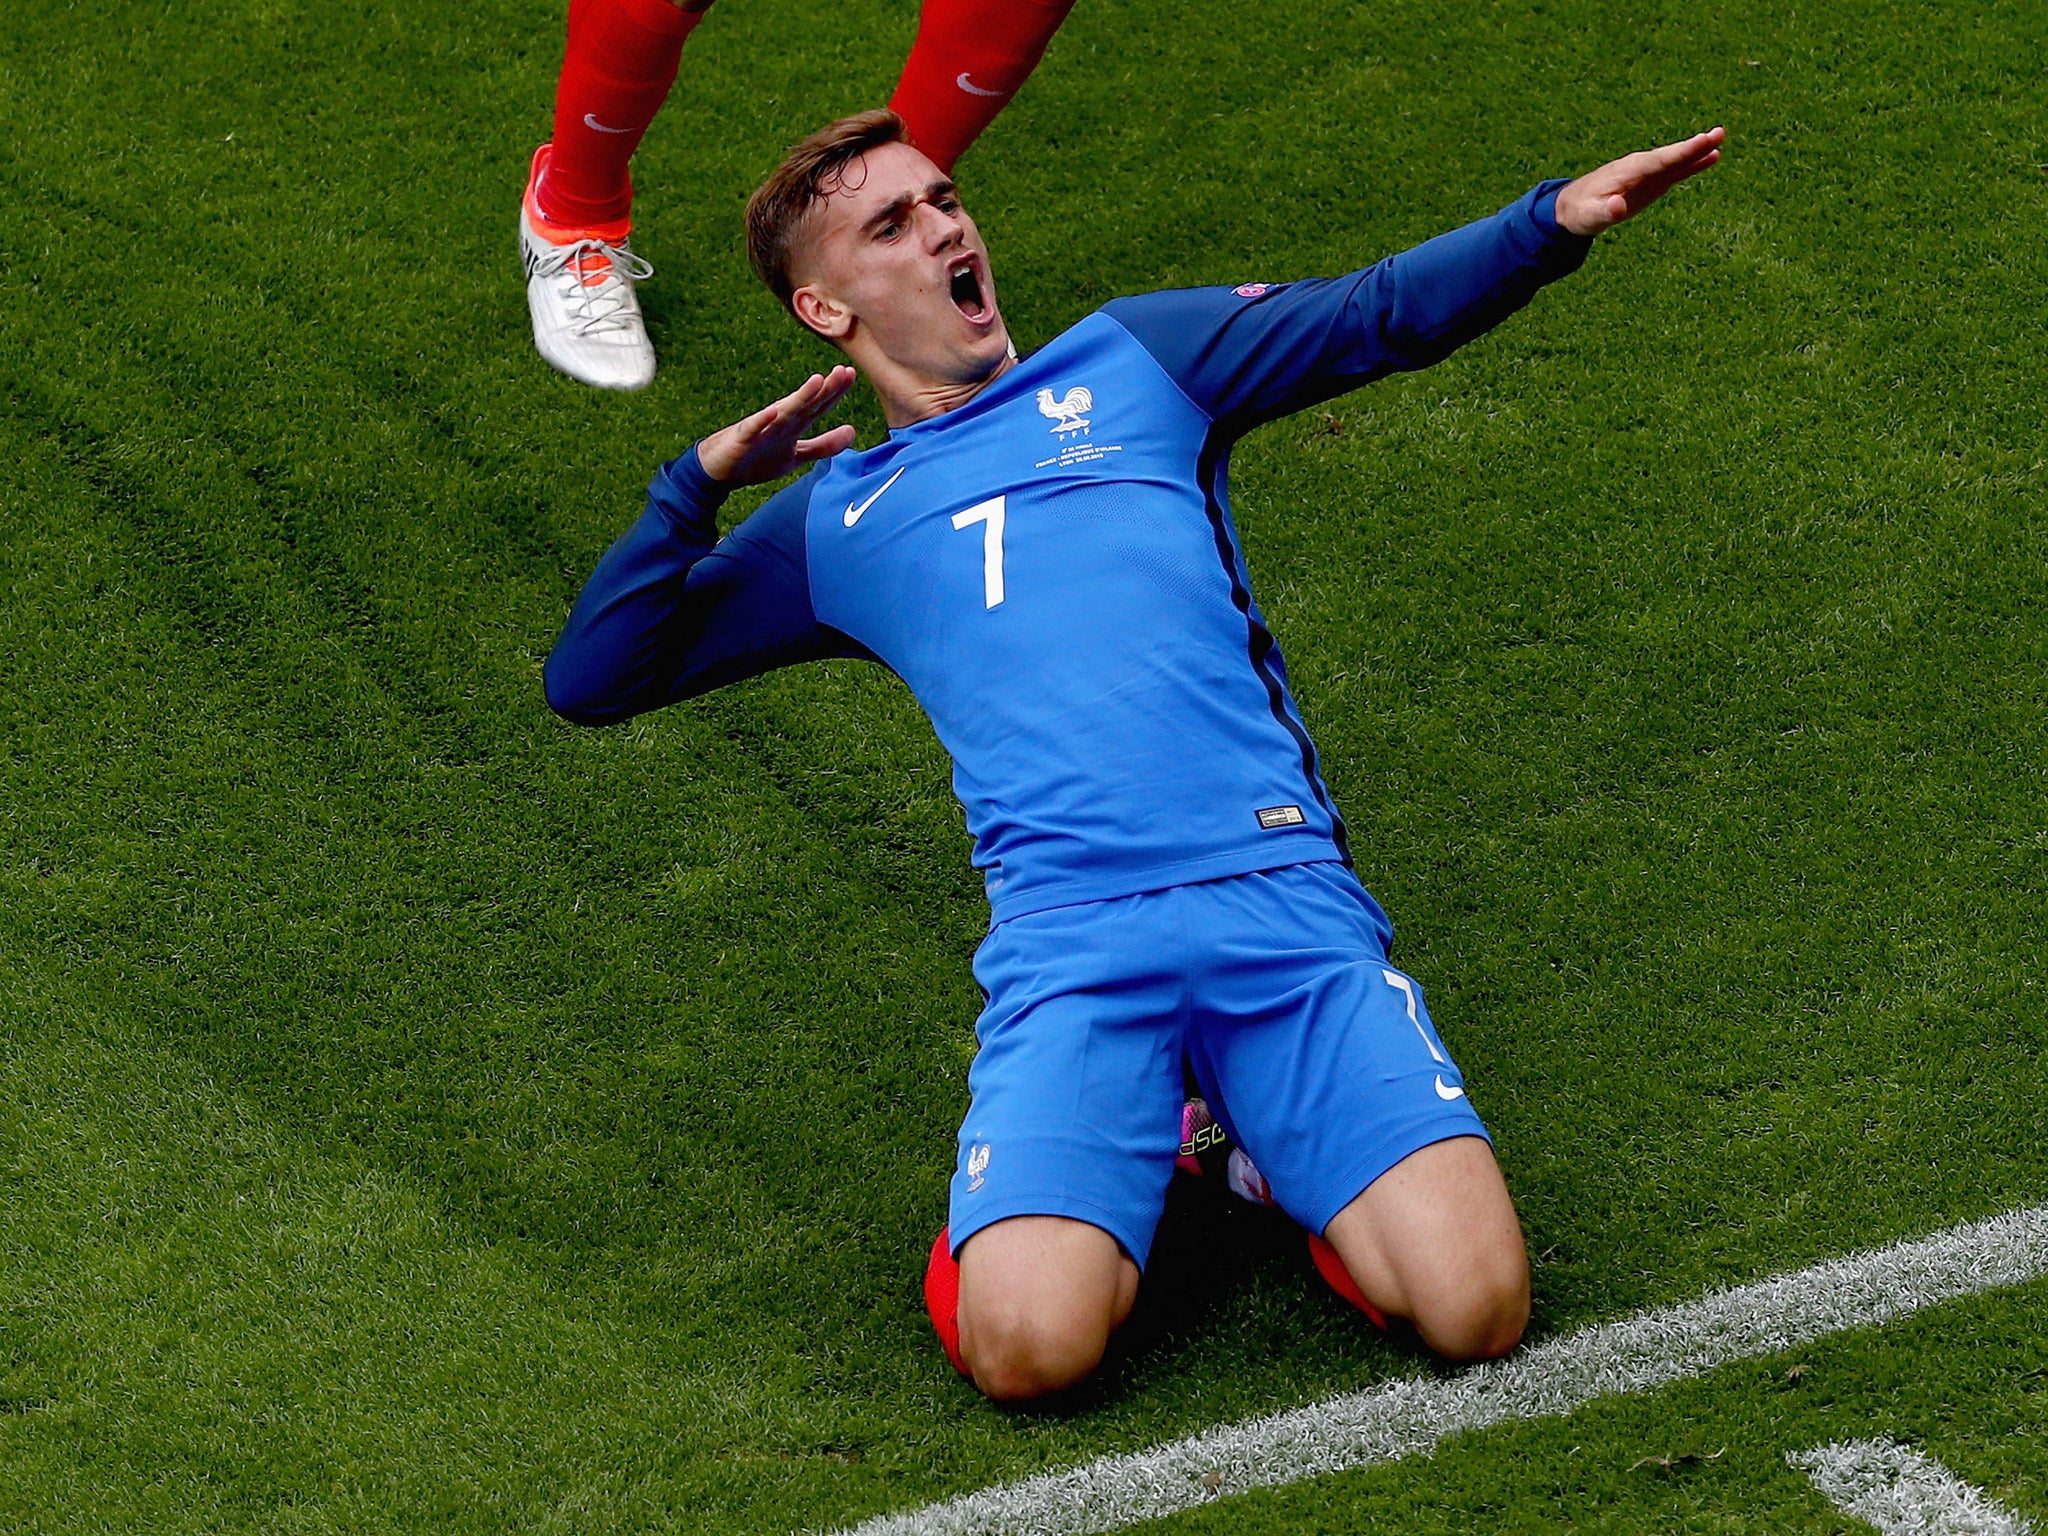 Antoine Griezmann celebrates scoring his first goal for France against the Republic of Ireland